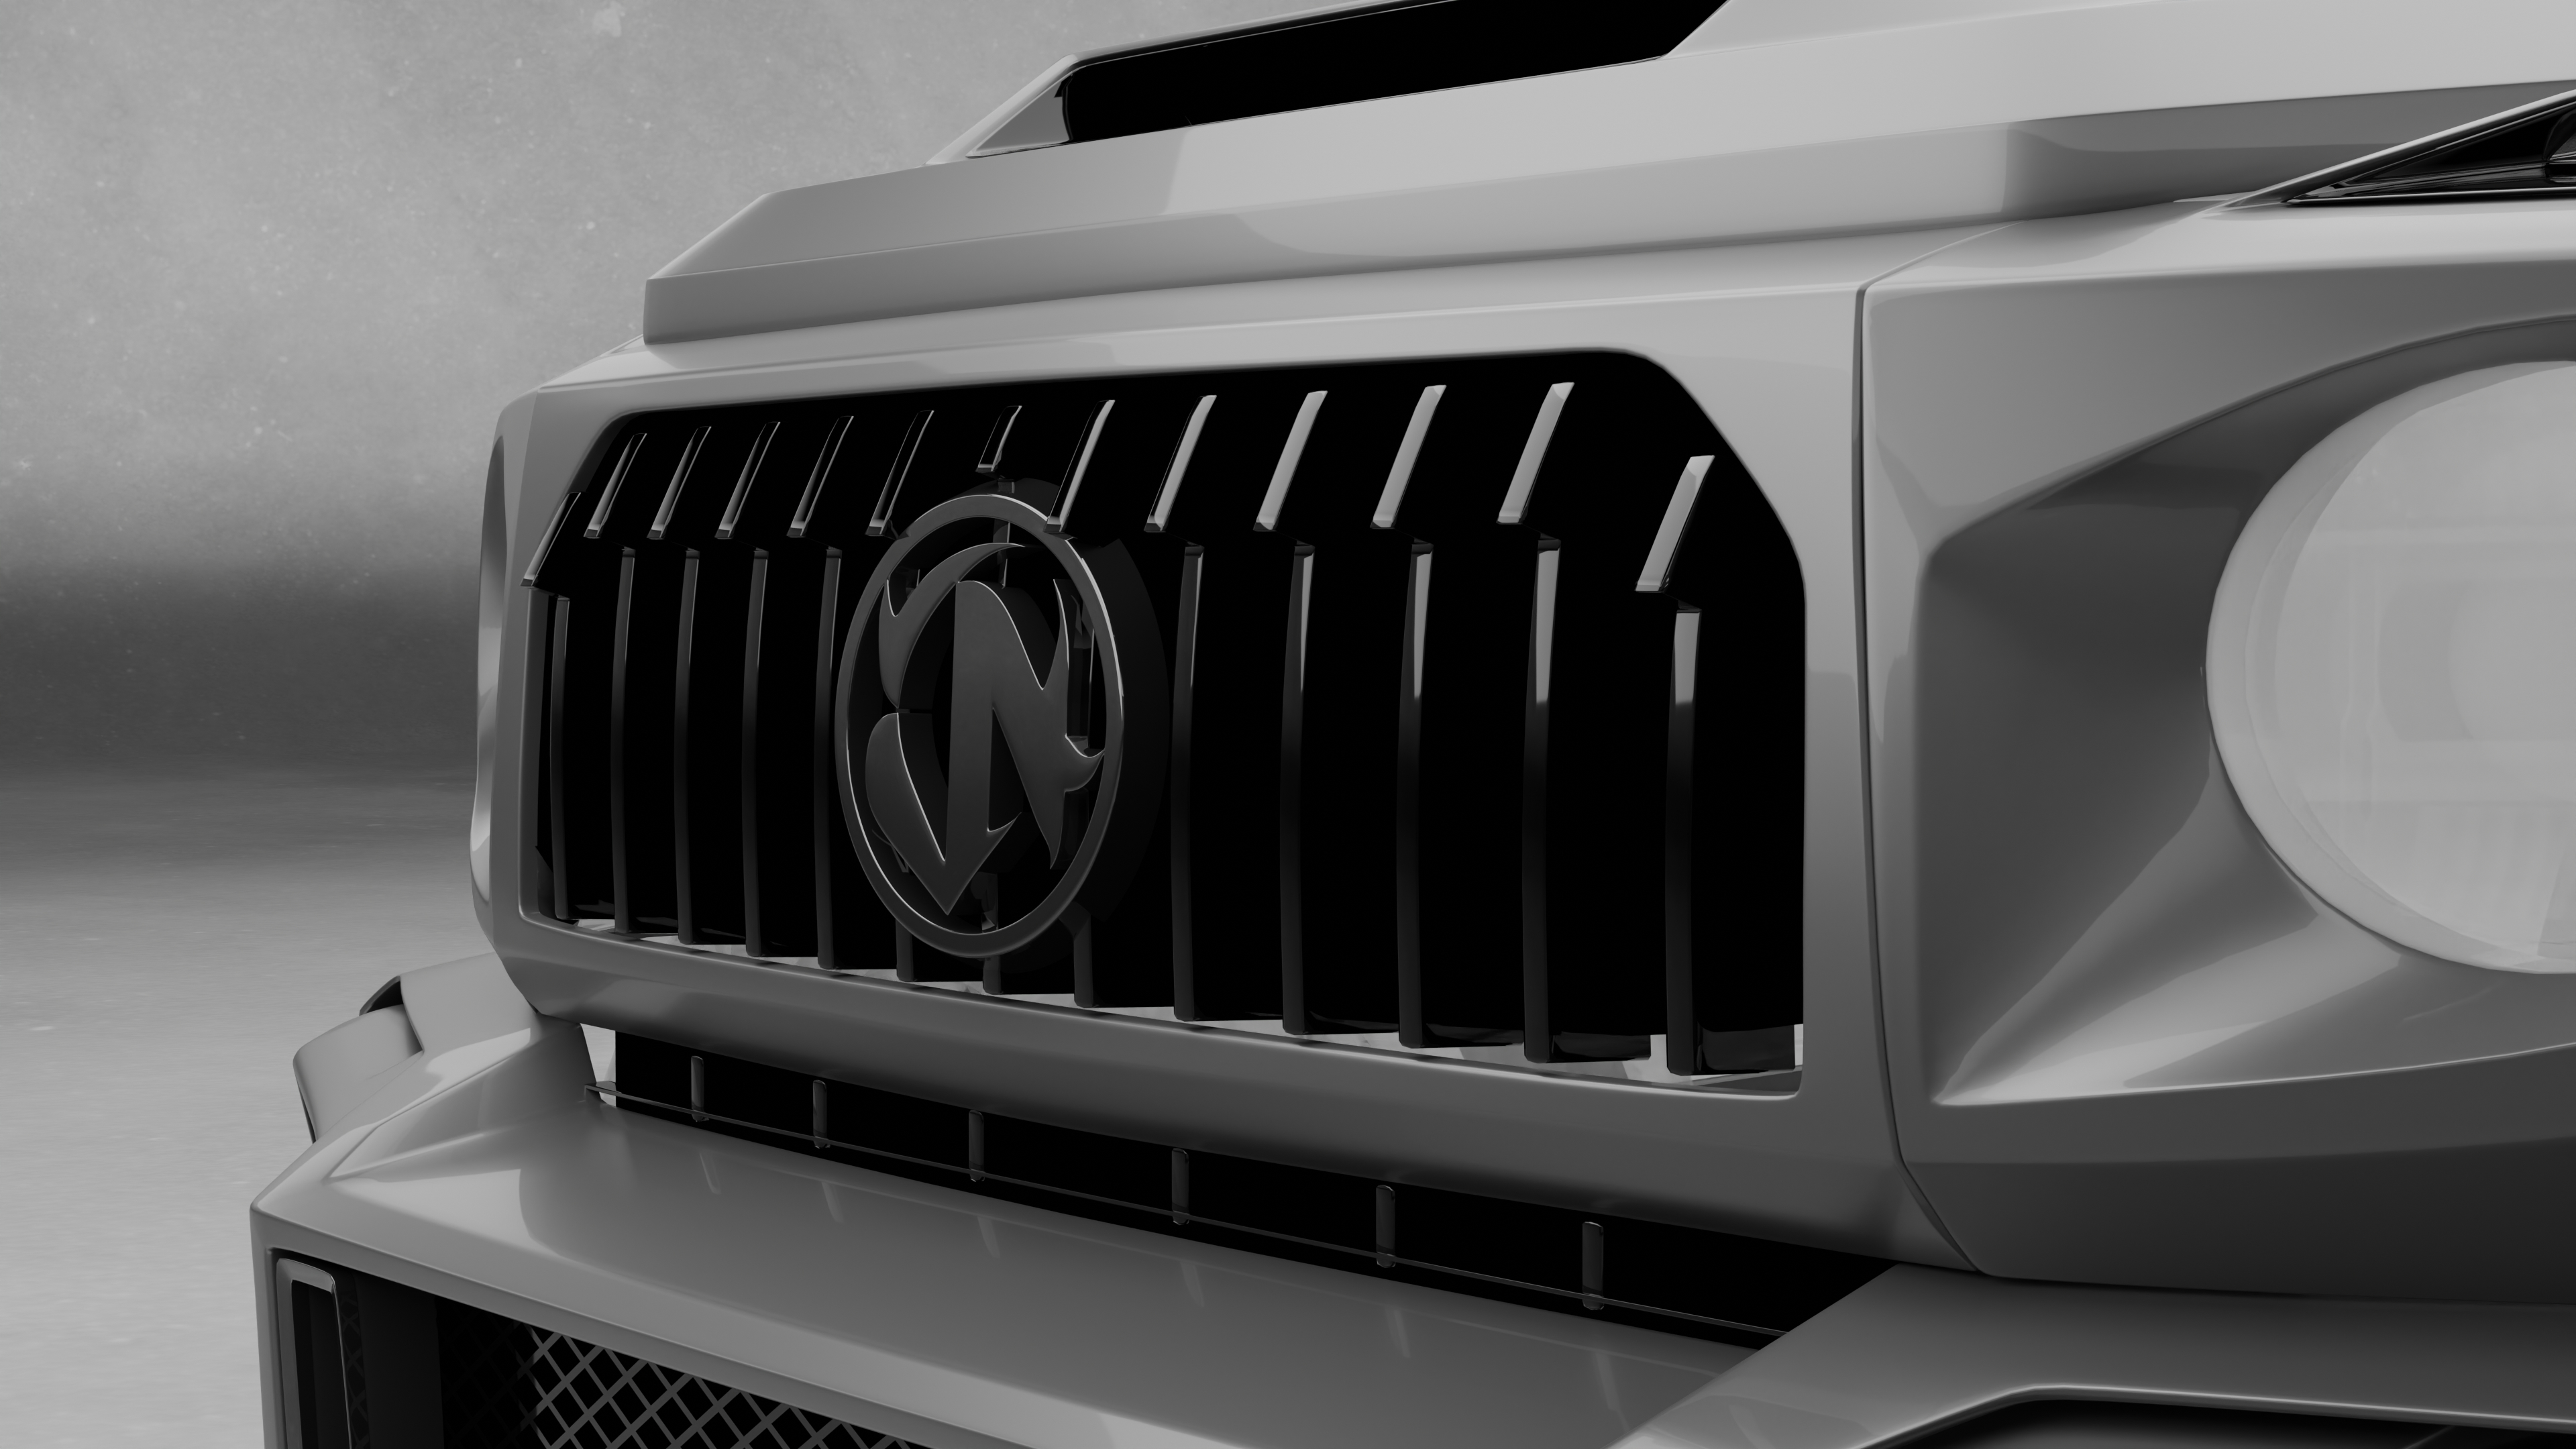 Custom Radiator Grille for Mercedes-Benz G-class G63 AMG